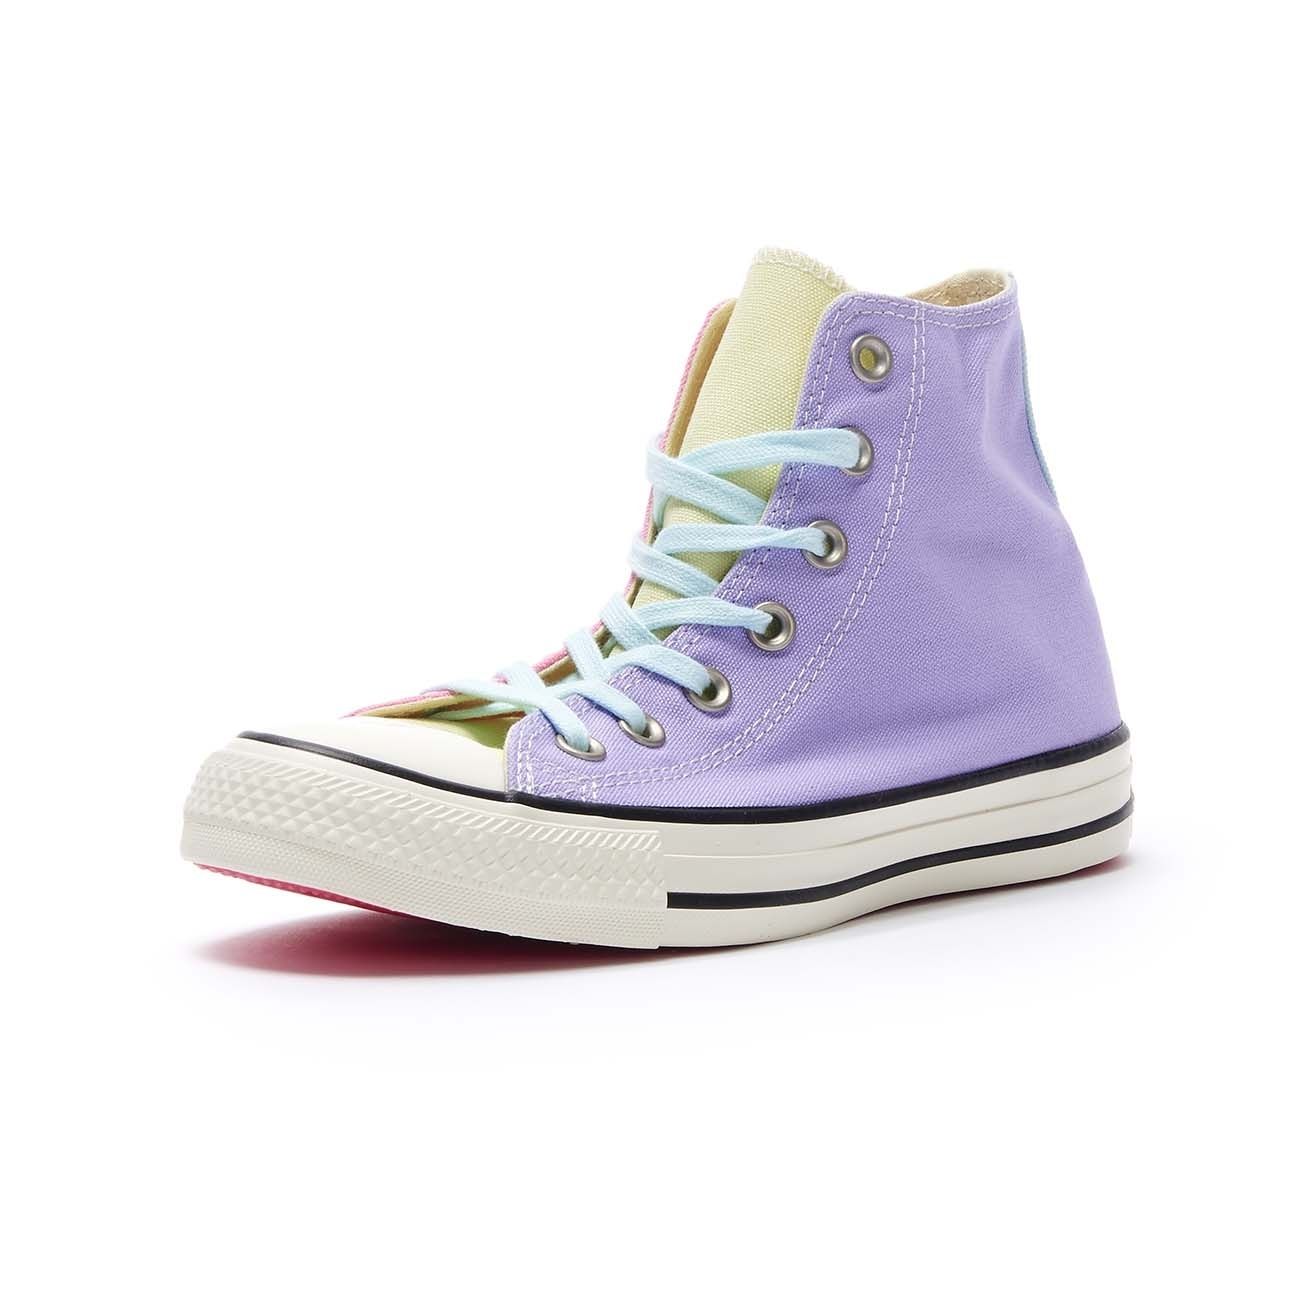 CONVERSE SNEAKERS CHUCK TAYLOR ALL STAR HI Donna Purple agate teal ... لاكاسا